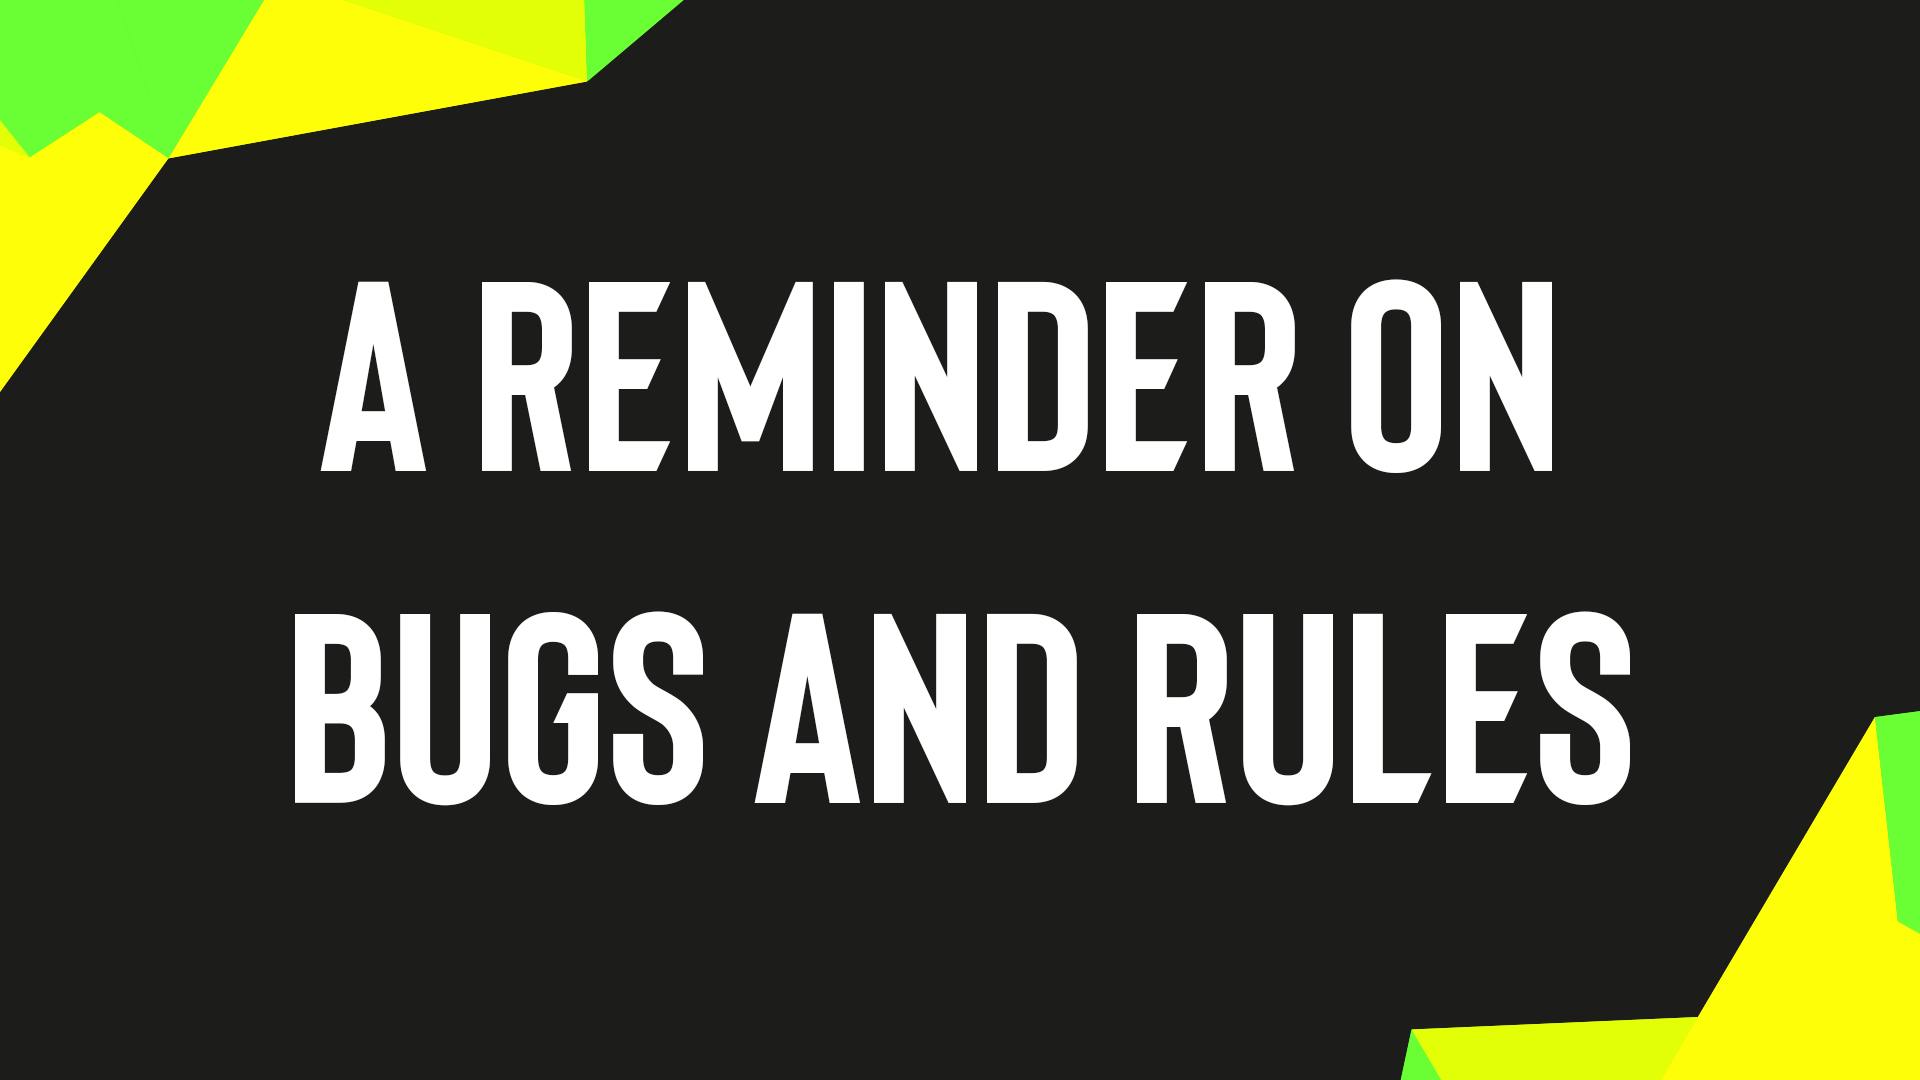 A REMINDER ON BUGS AND RULES